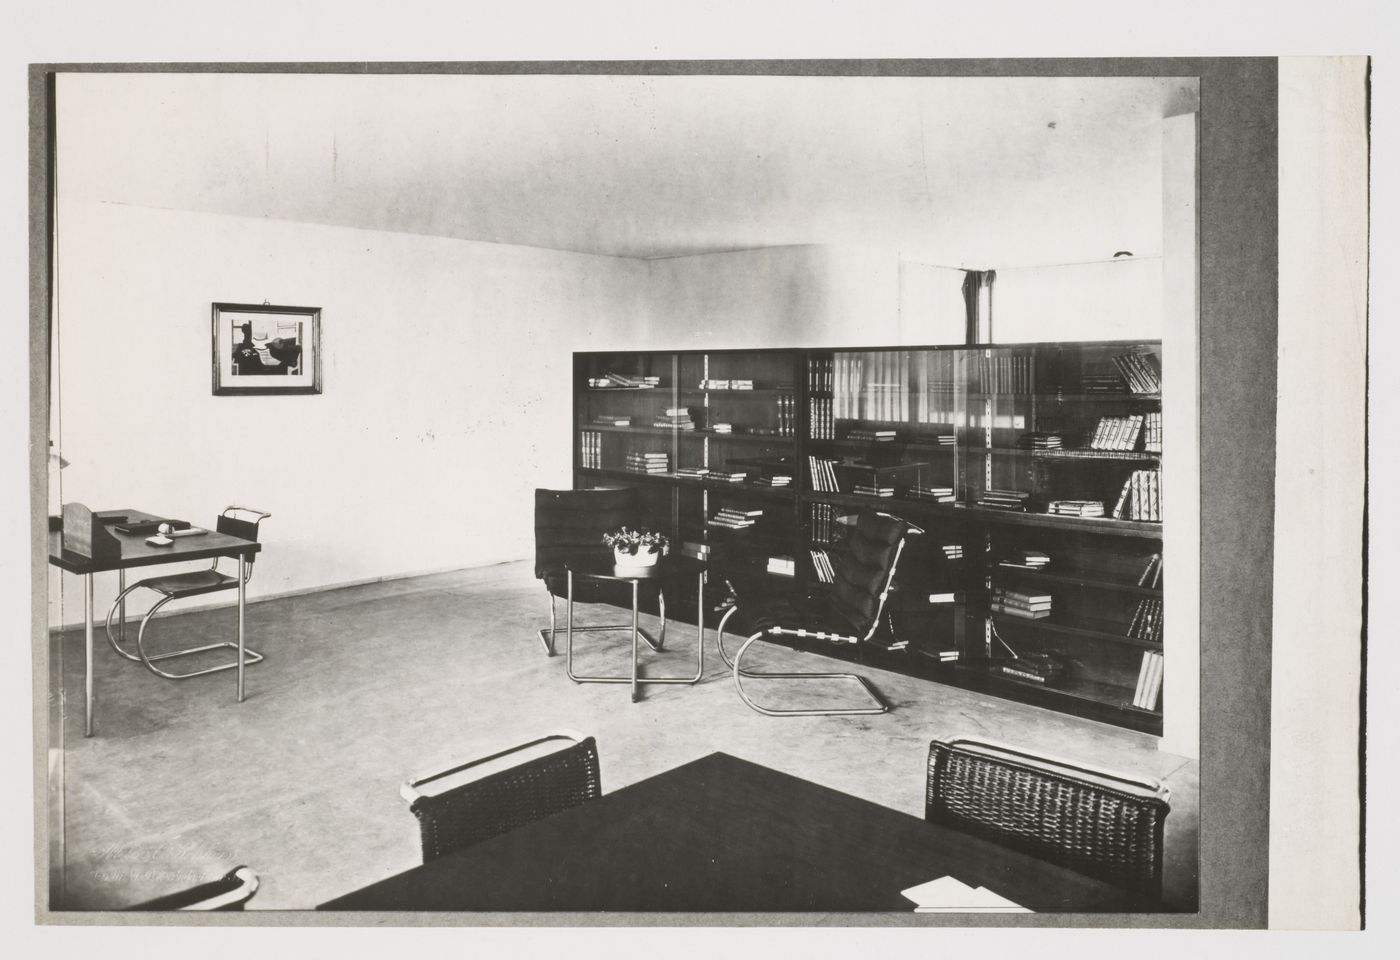 Interior view of an Apartment for a Bachelor, part of the Dwelling of Our Time Exhibit at the Berlin Building Exhibition of 1931, Germany